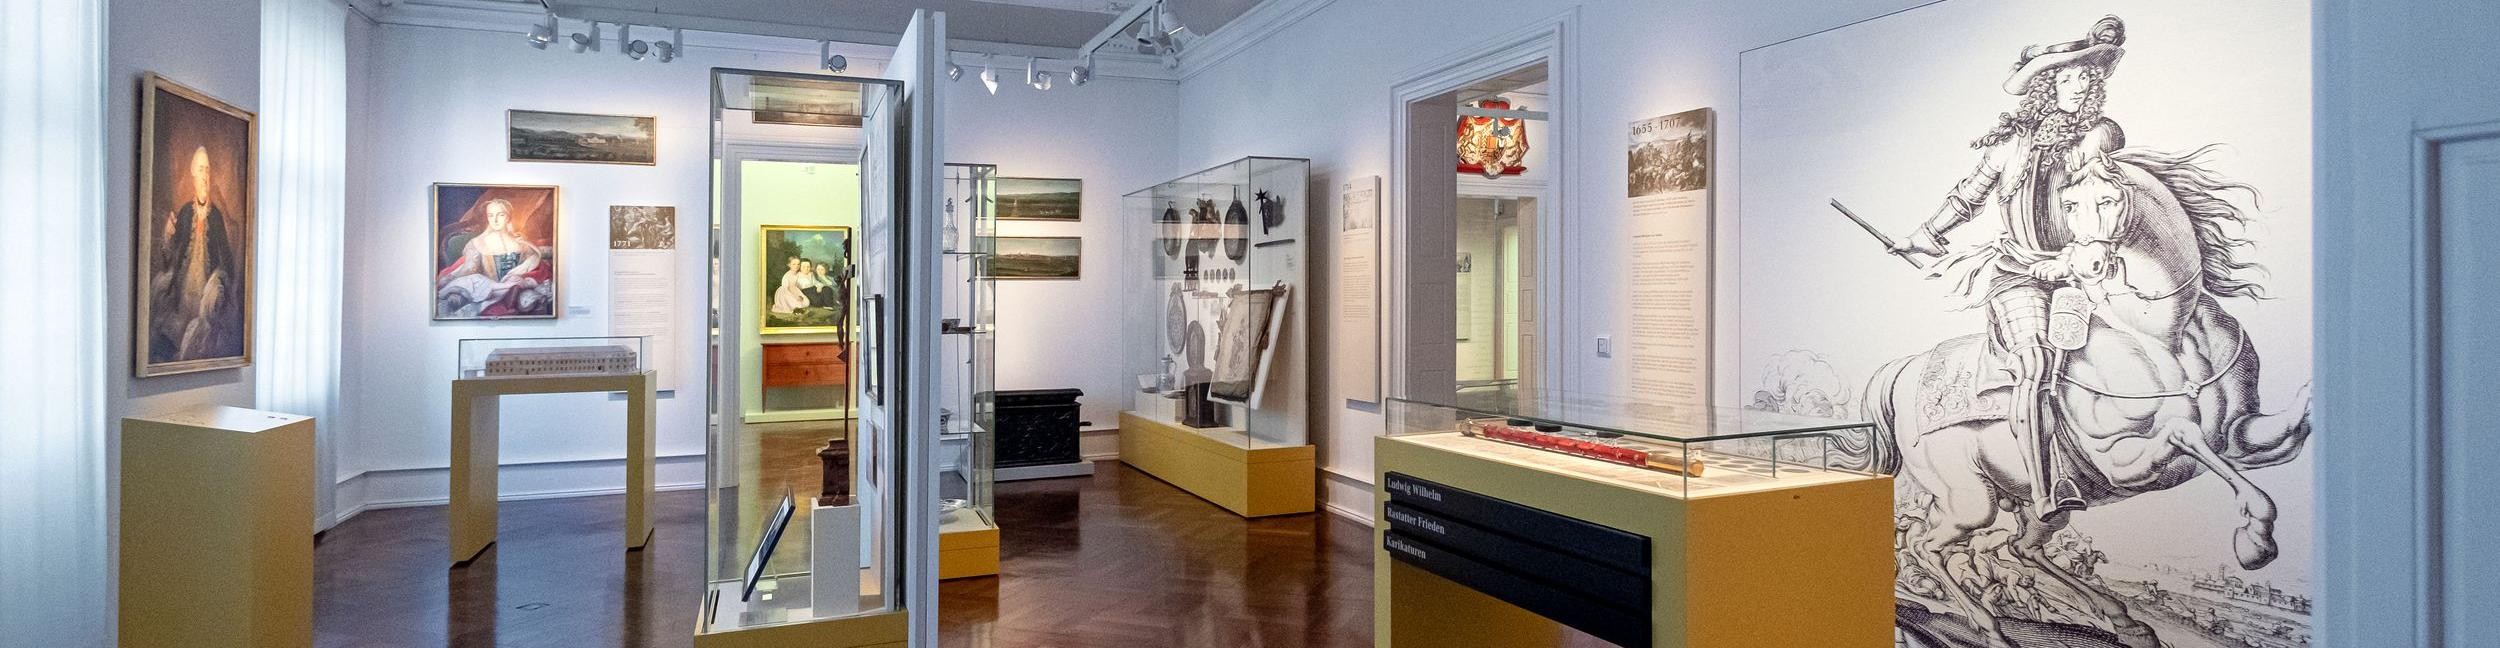 View of the permanent exhibition on the city's history in the Rastatt City Museum, photo: Oliver Hurst.